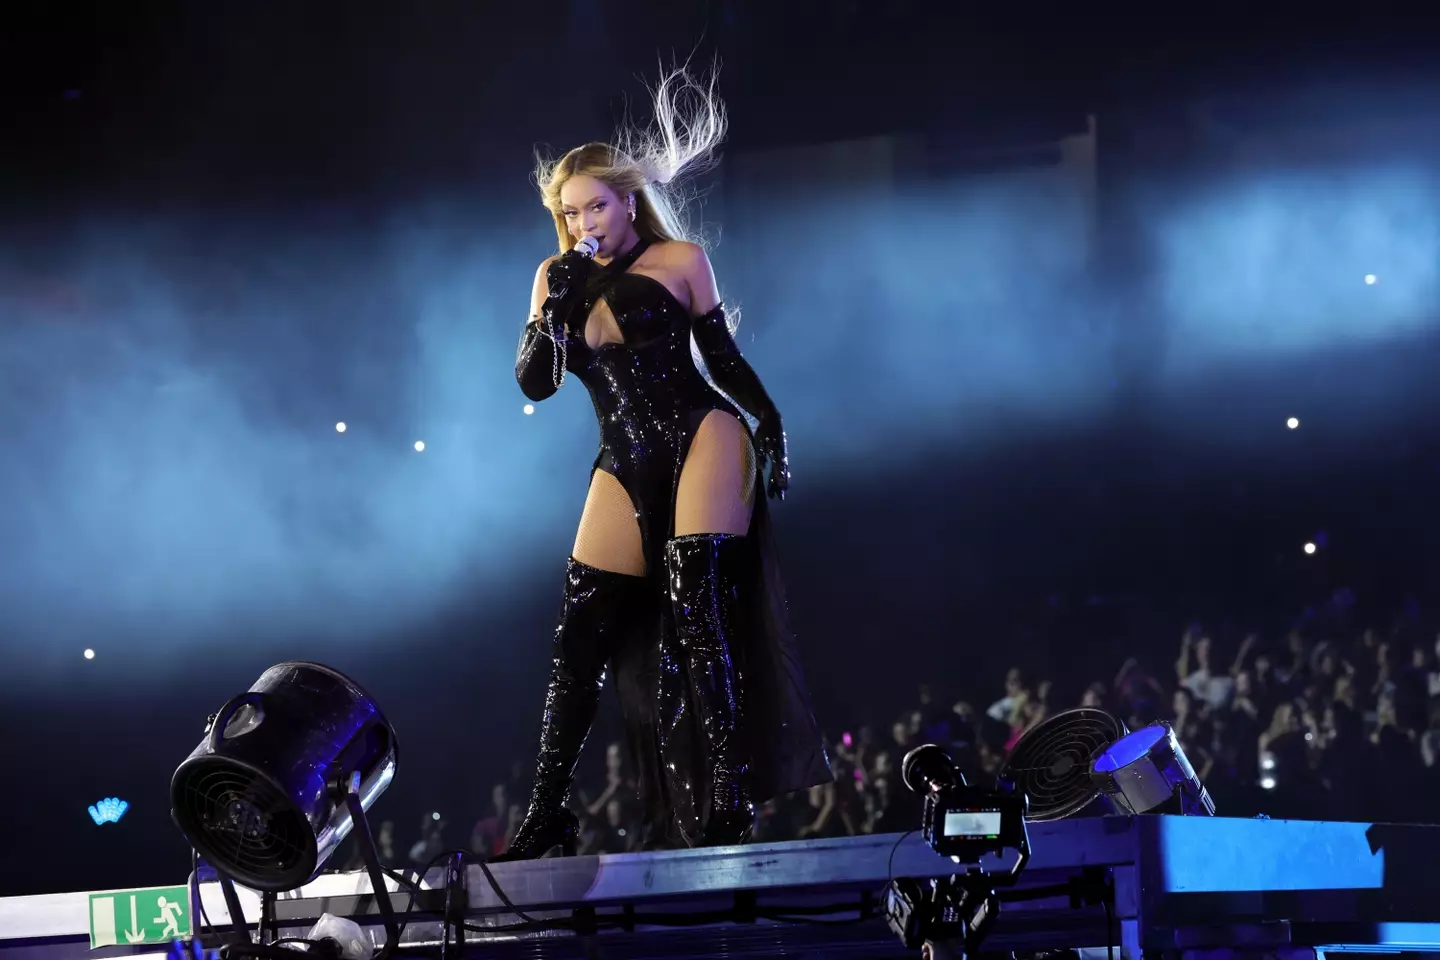 The scanning was in process for a Beyoncé concert in May.